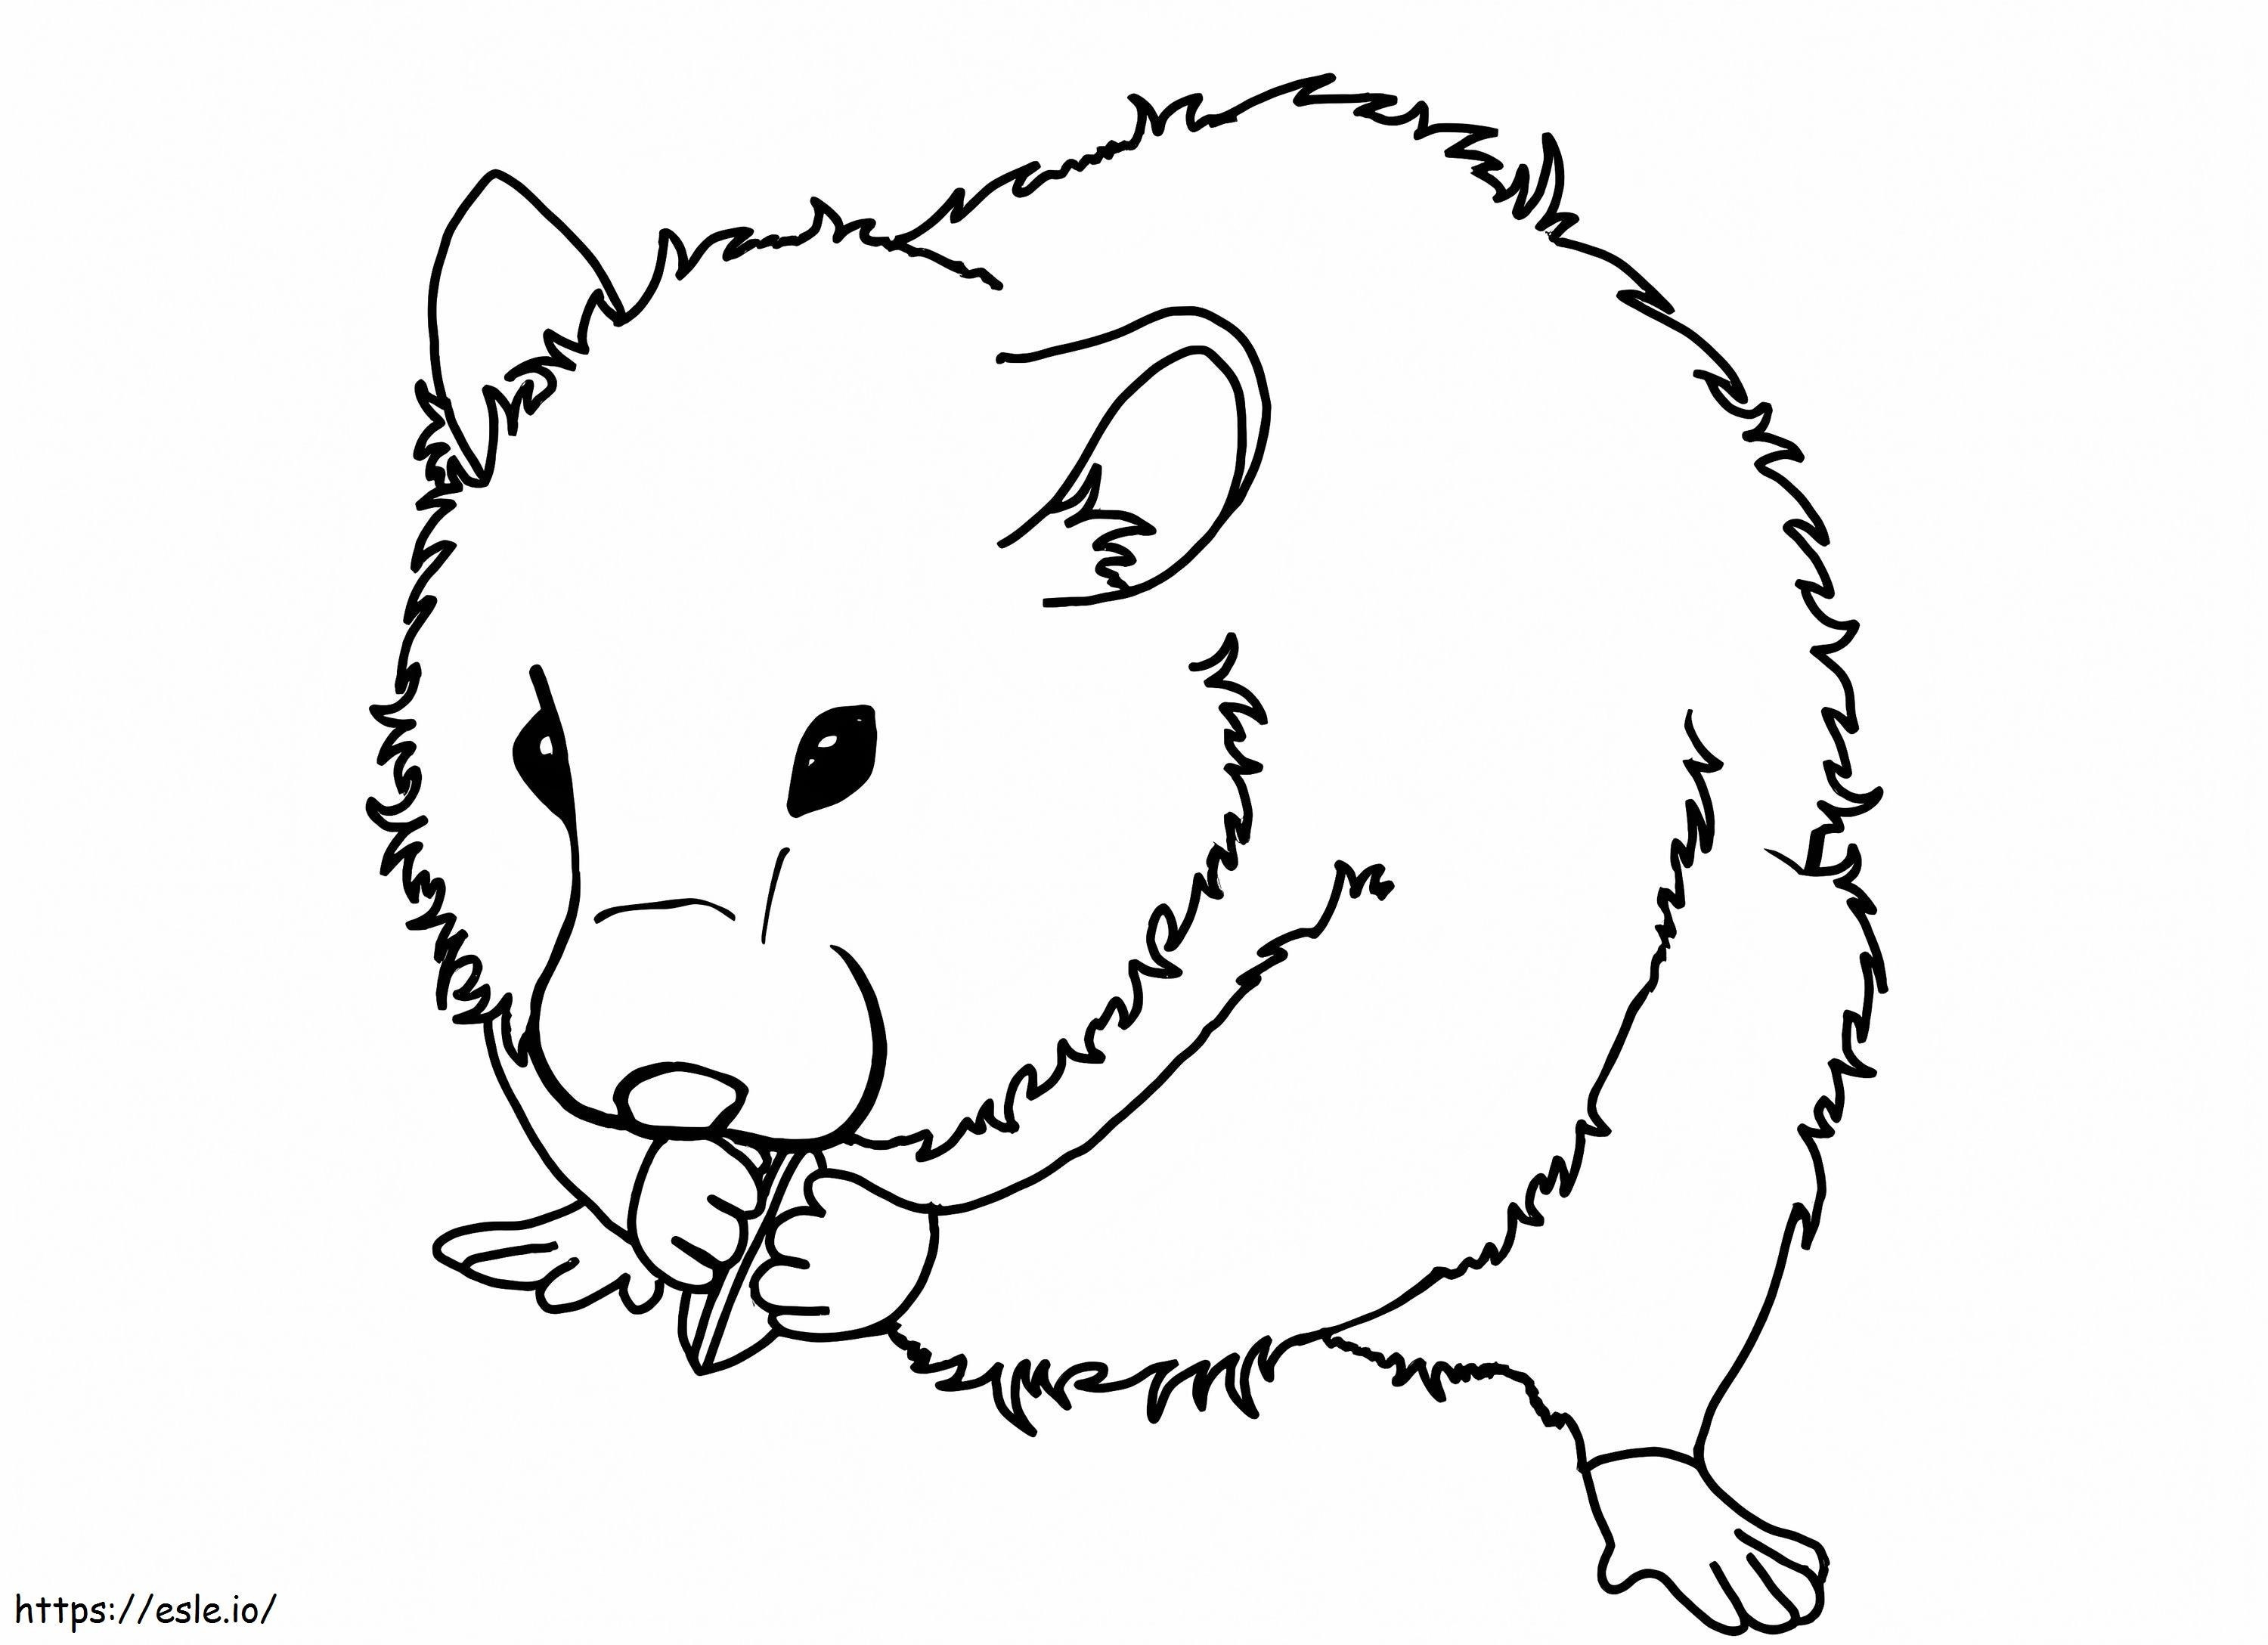 Guinea Pig 5 coloring page